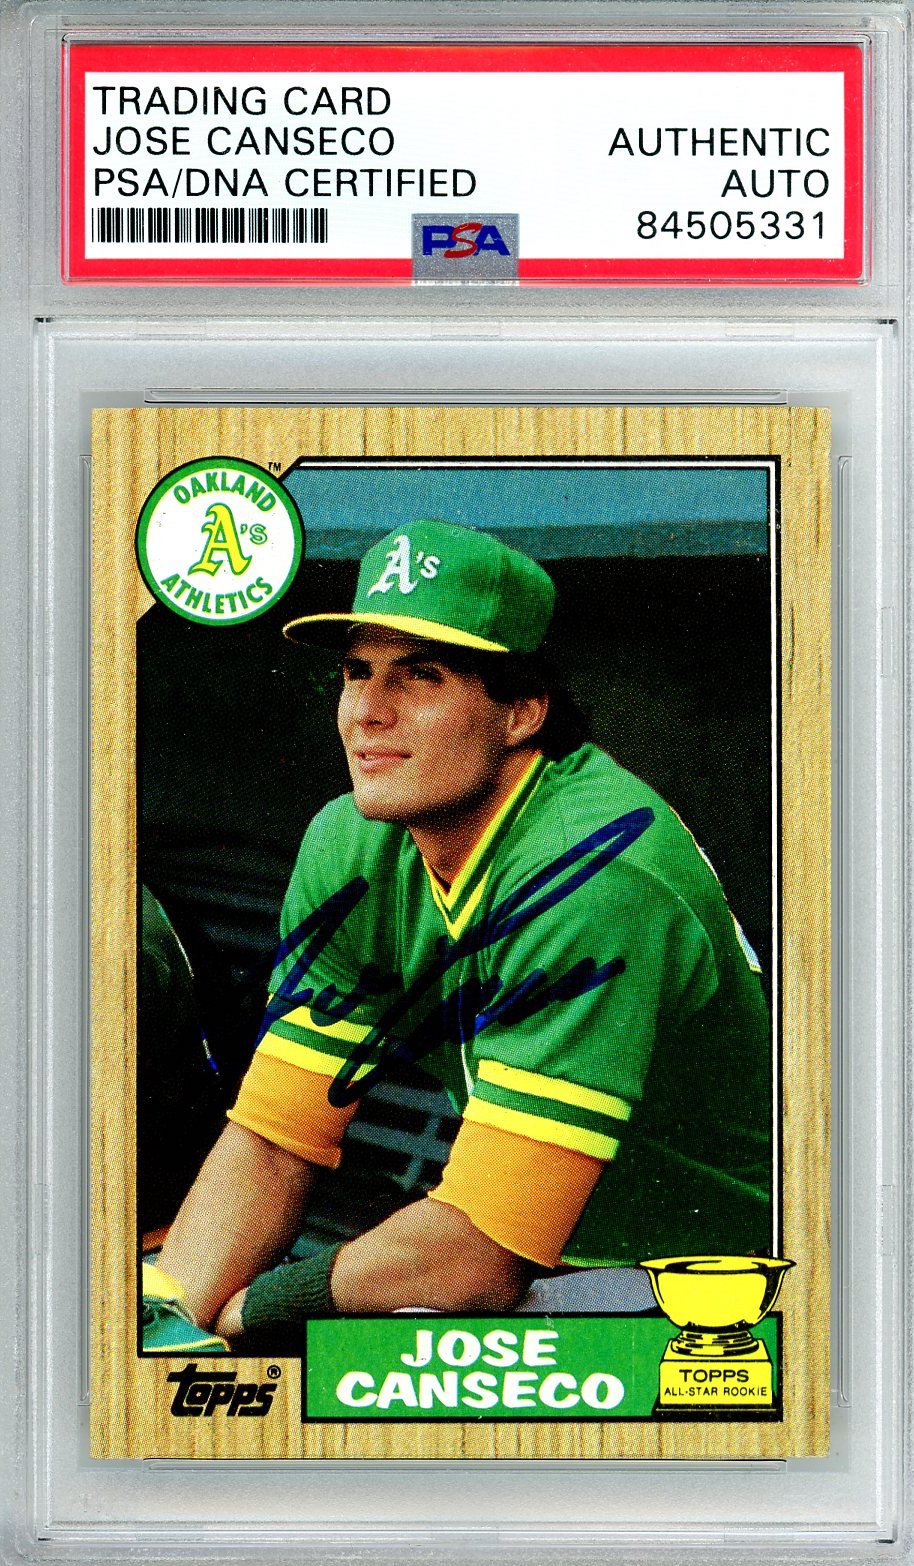 1987 TOPPS JOSE CANSECO AUTO RC ROOKIE #620 PSA DNA (331)